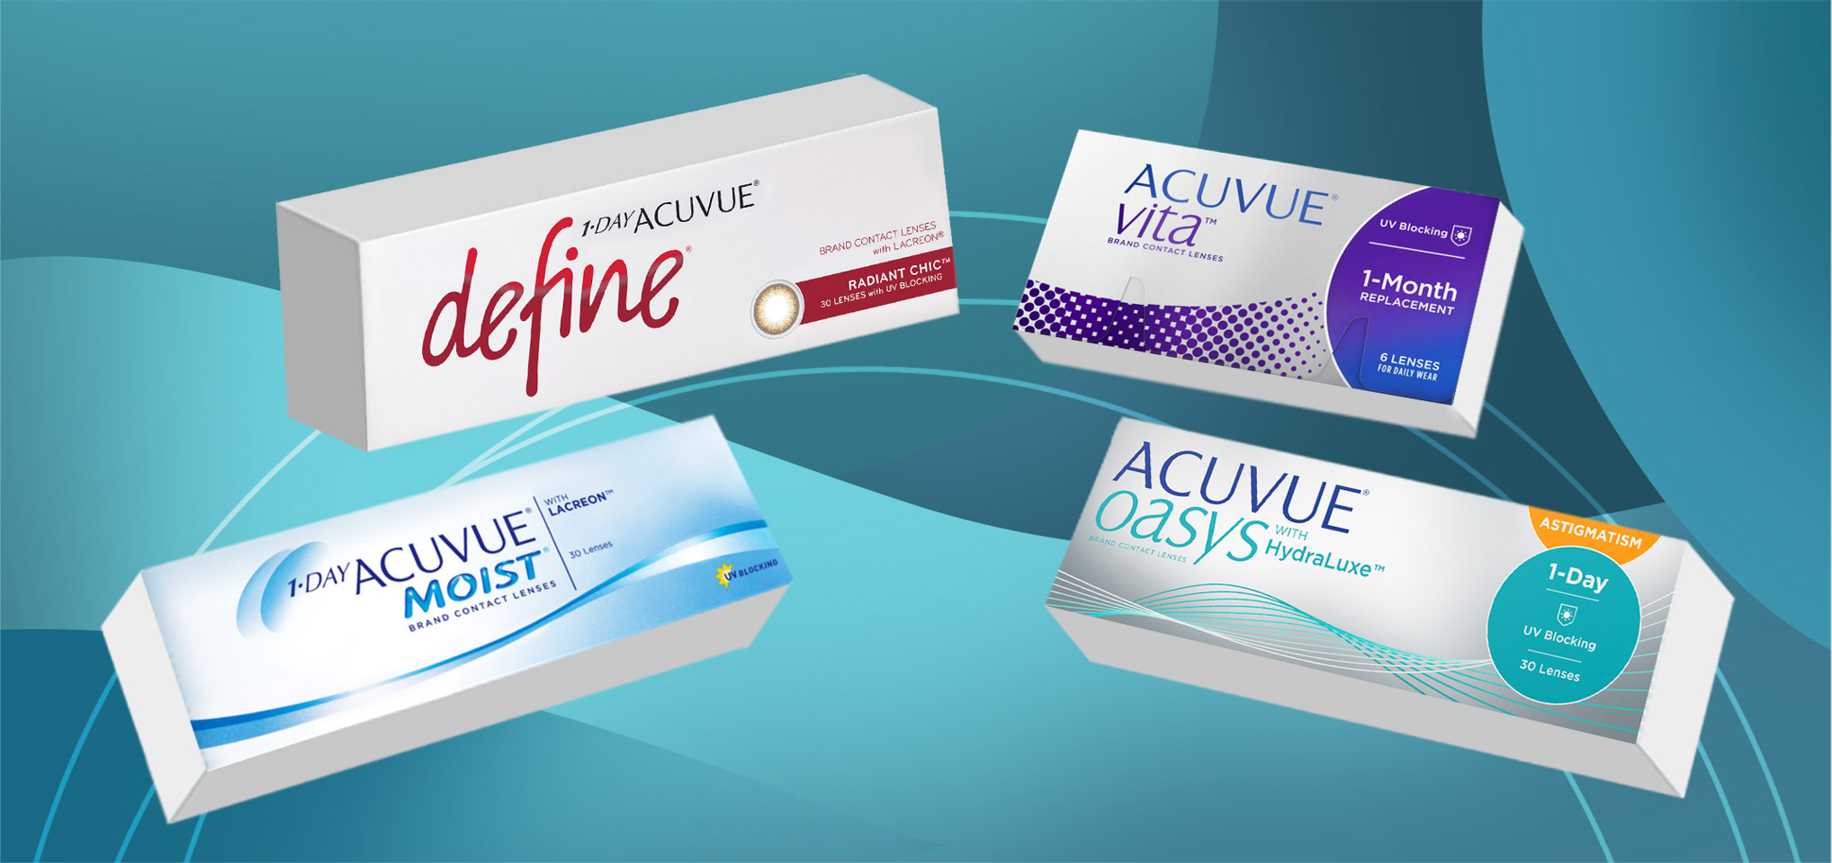 ACUVUE® Contact Lens Product Banner: ACUVUE® DEFINE®, ACUVUE® VITA™, ACUVUE® MOIST®, ACUVUE® OASYS with HYDRALUXE™